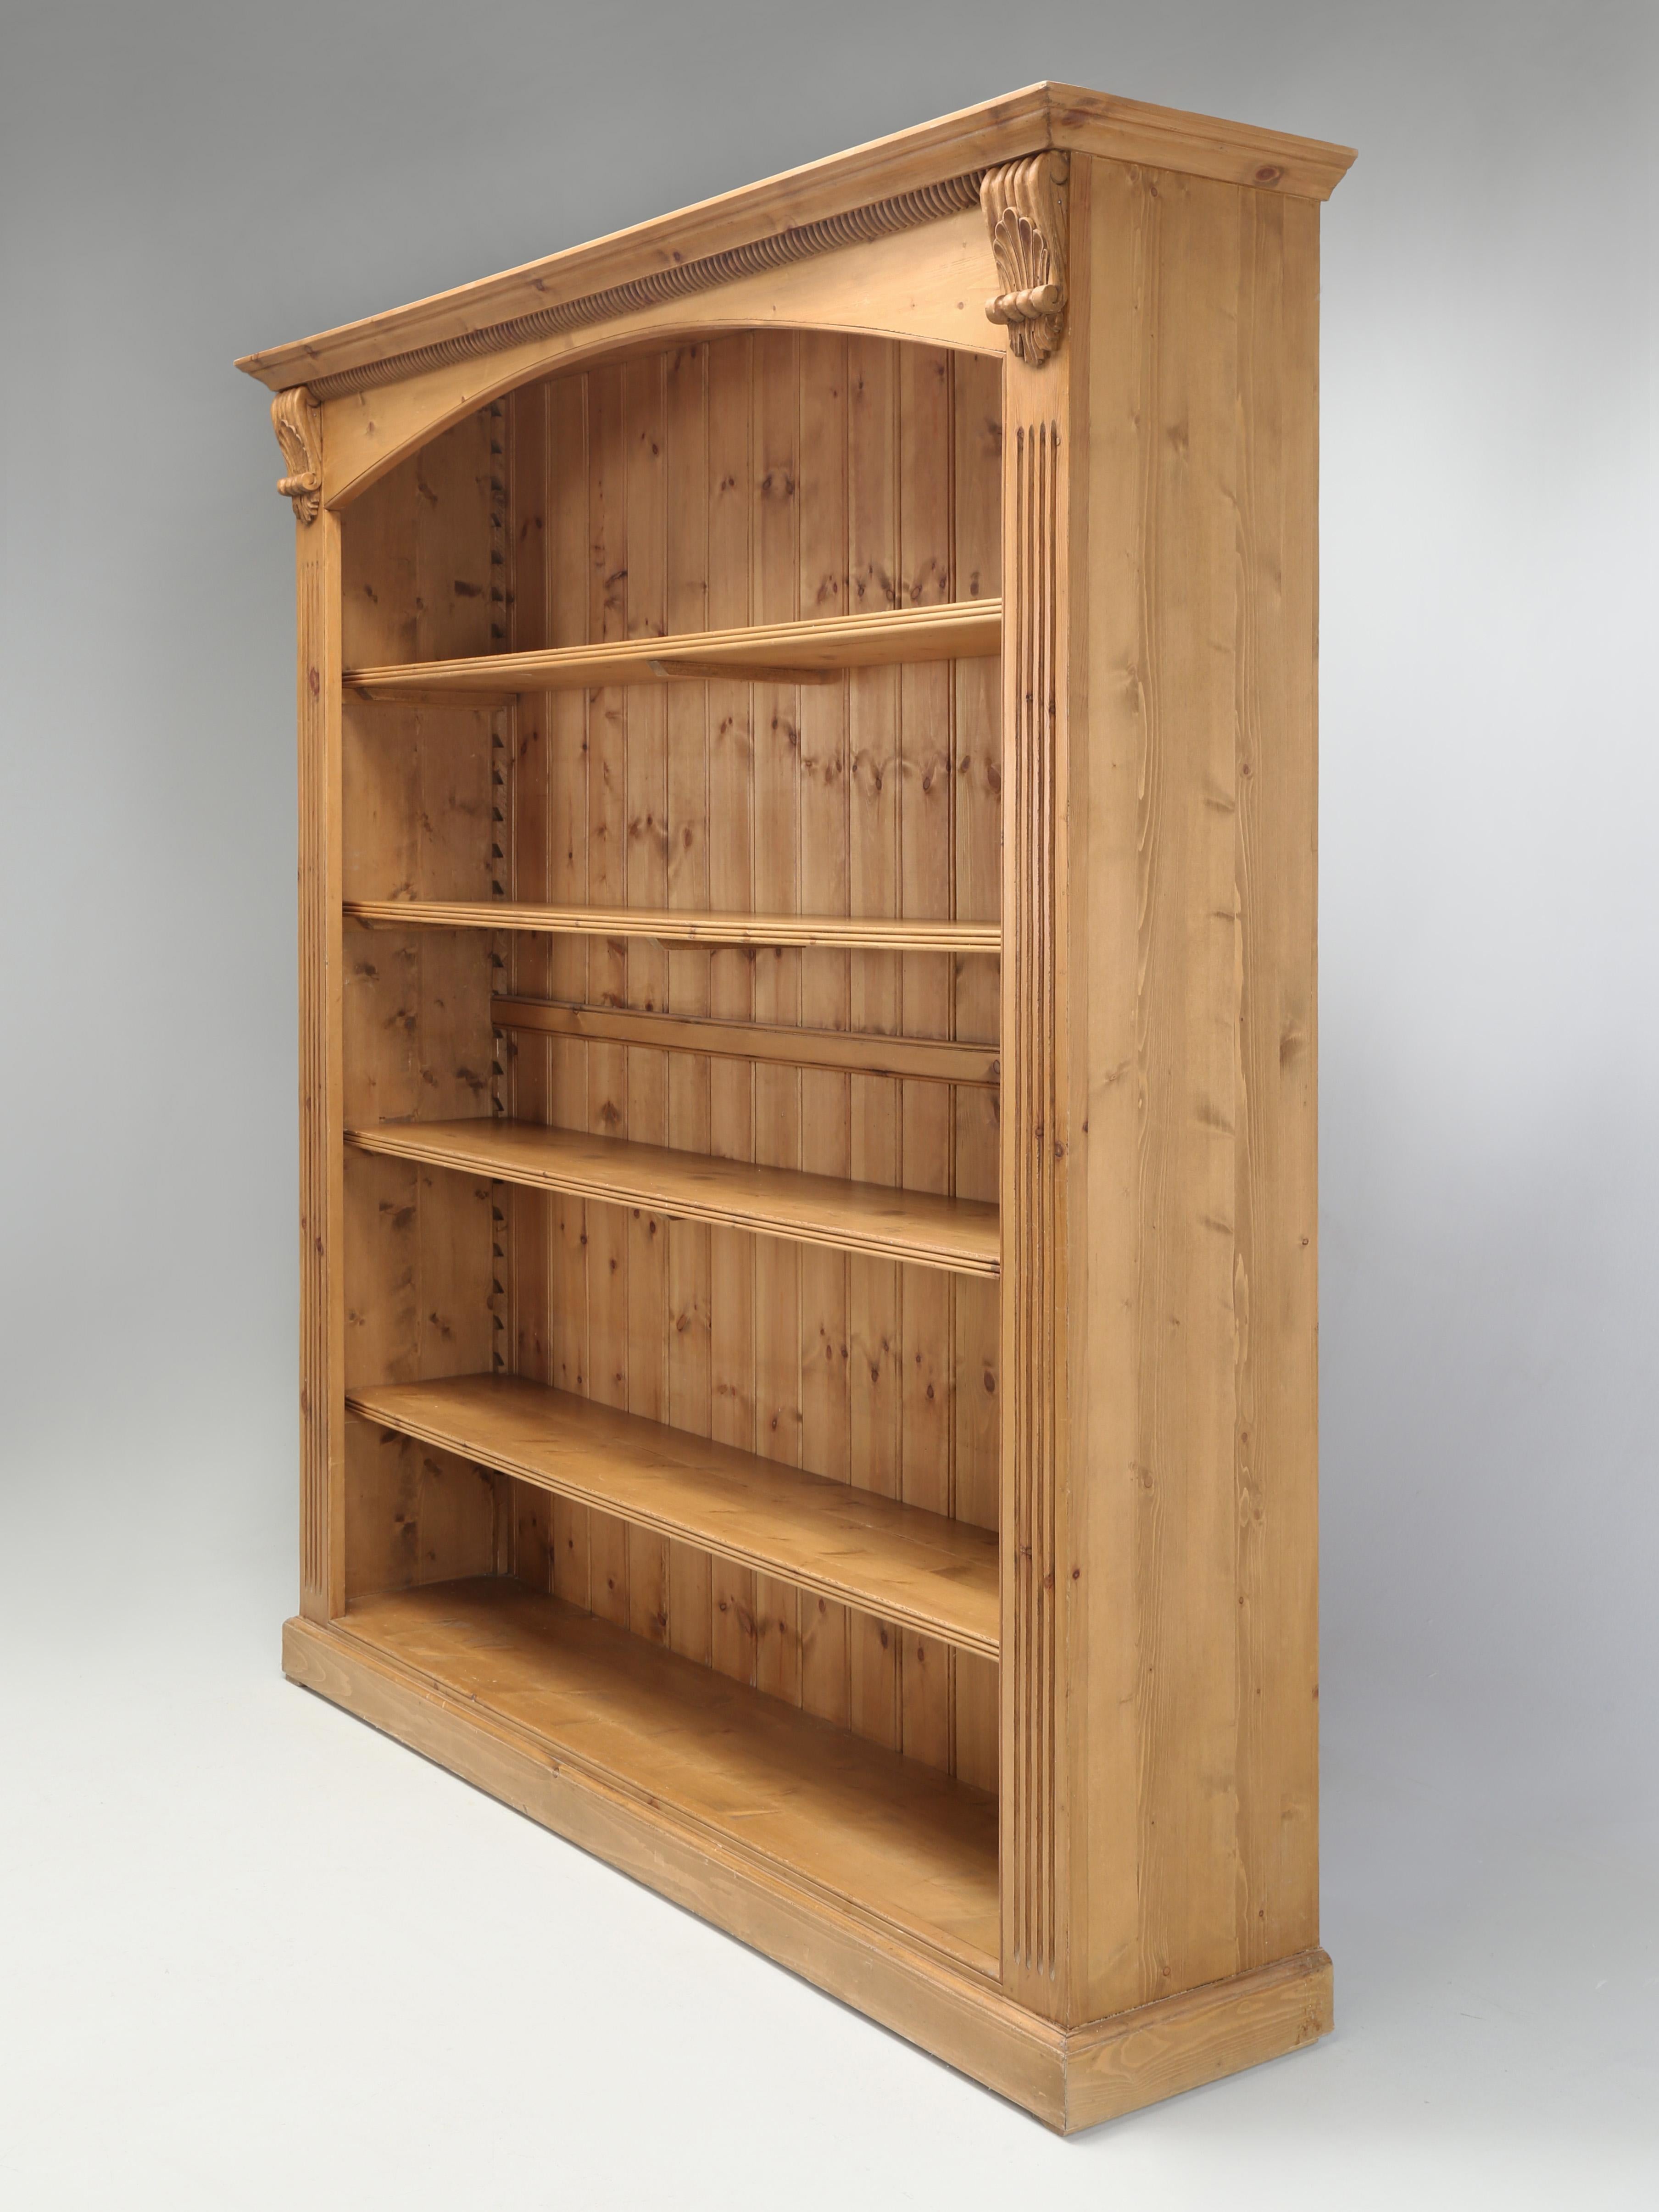 English Pine Bookcase that was made in the town of Hull a port city in the East Riding of Yorkshire region of England. Many years ago, there was company named Chrispyn who specialized in producing beautiful English Country Pine Furniture with their